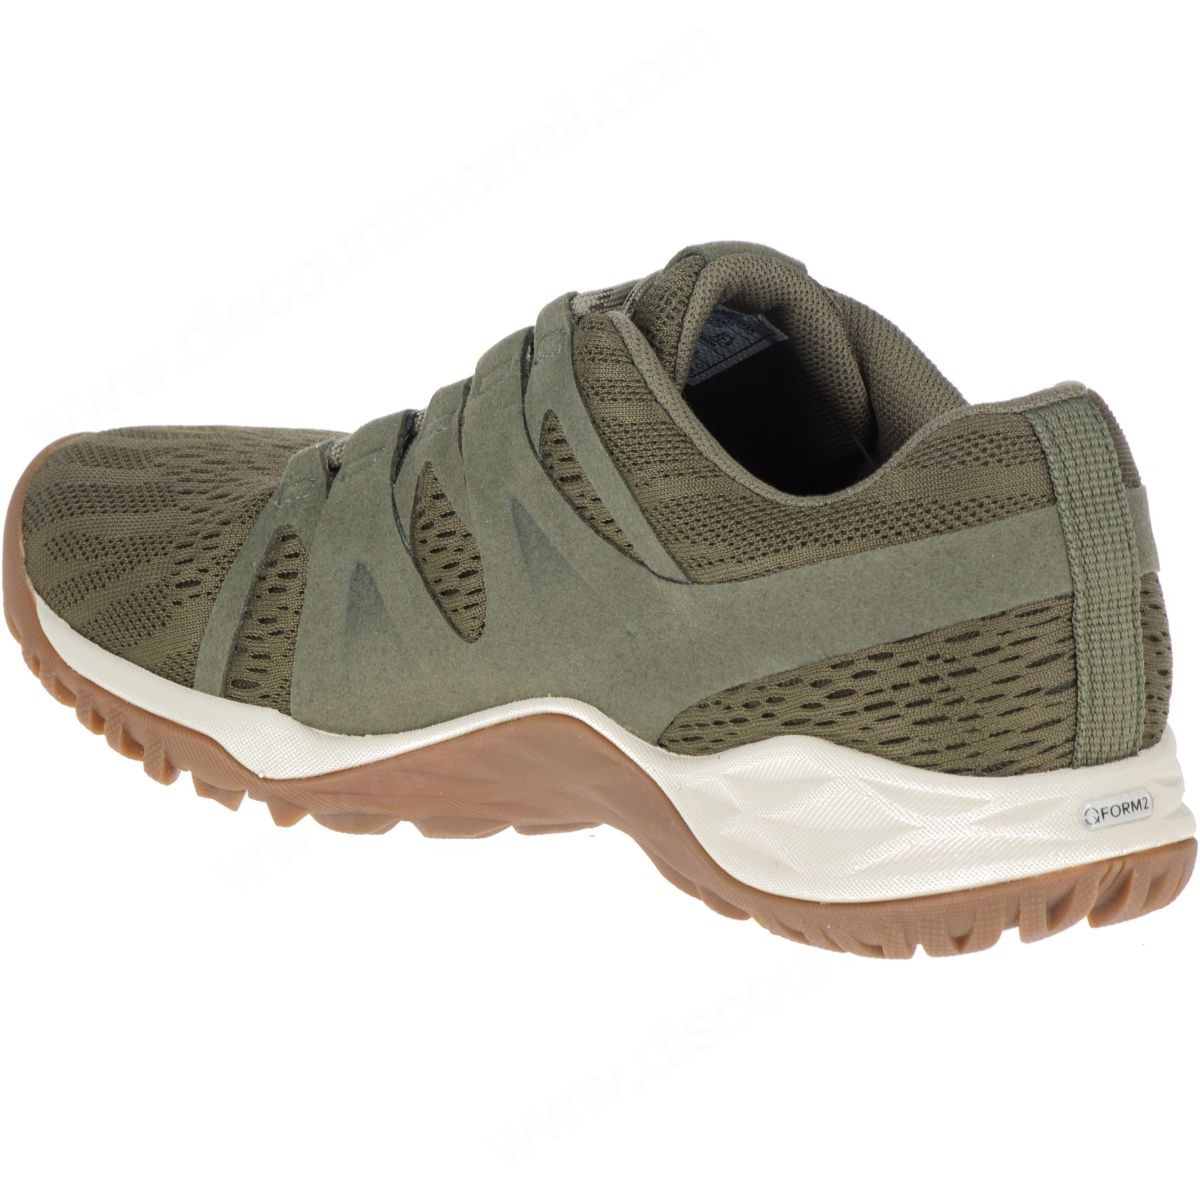 Merrell Lady's Siren Guided Lace Q2 Dusty Olive - -6